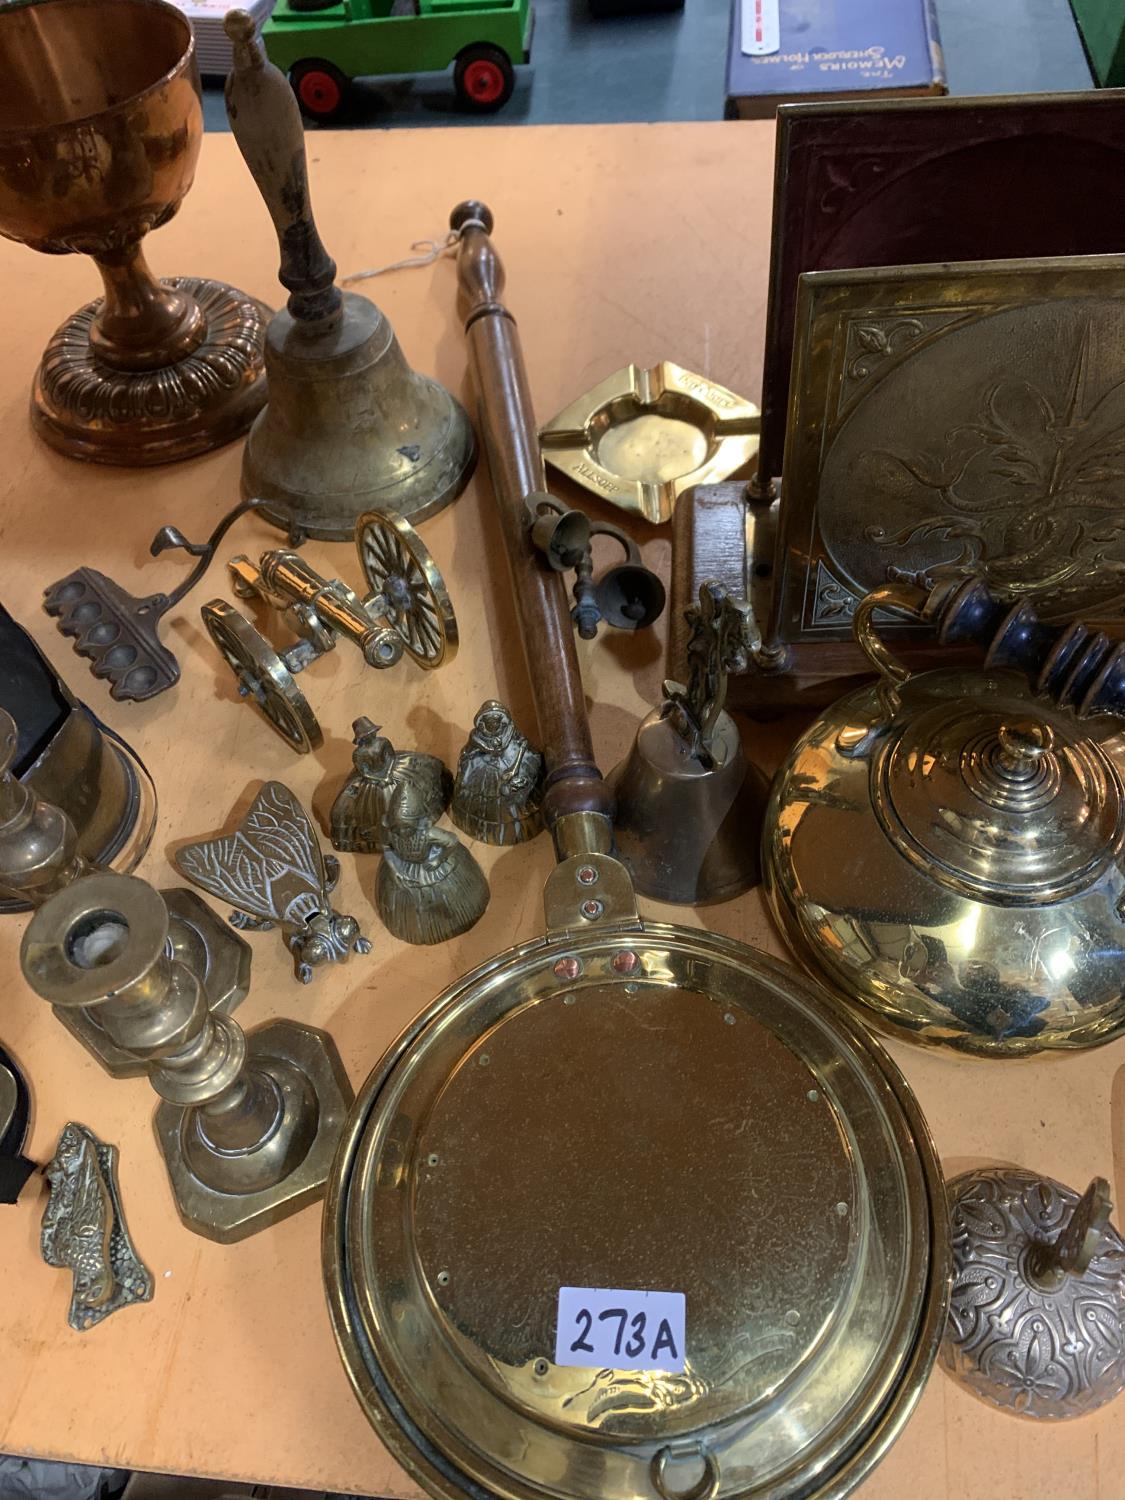 A LARGE QUANTITY OF BRASSWARE TO INCLUDE A BELL, HORSE BRASSES, KETTLE, CANDLESTICKS, CANNON, LAMP - Image 7 of 12